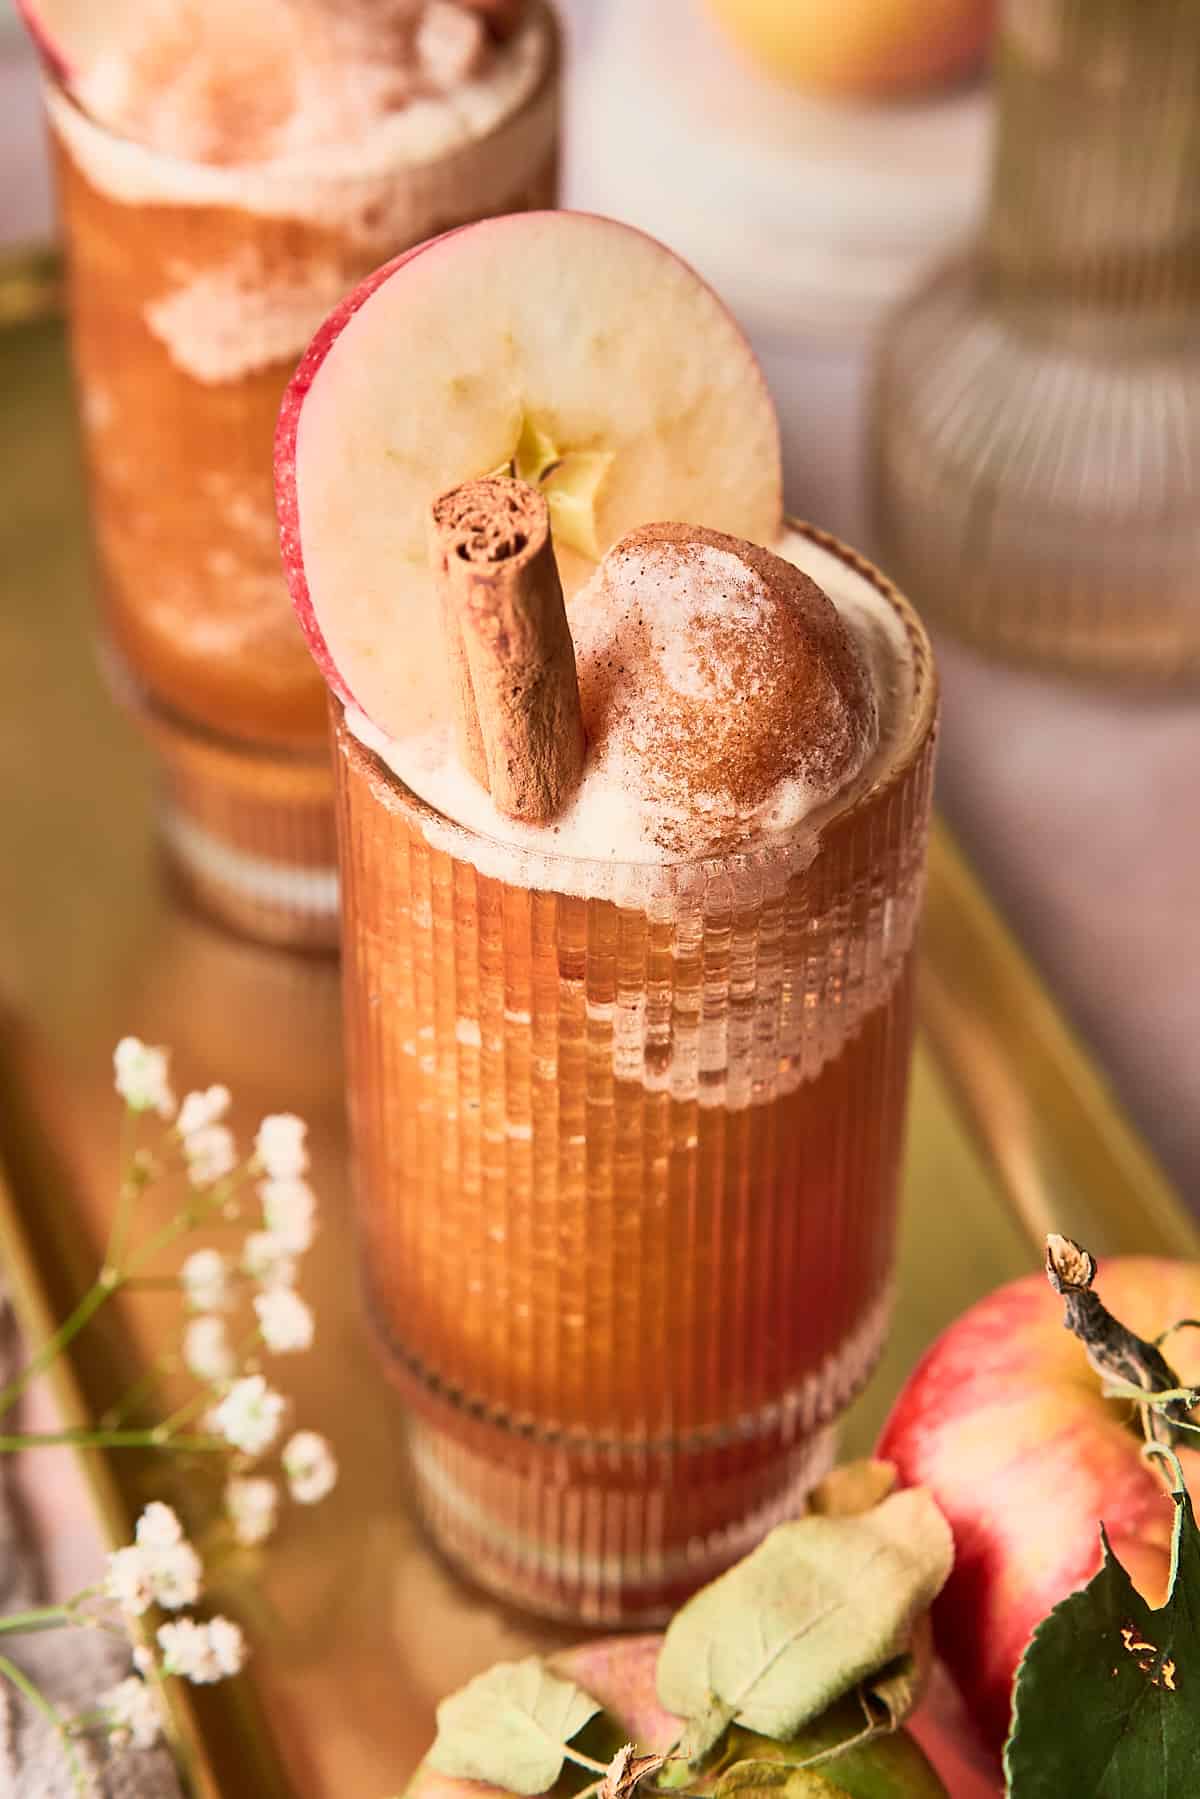 45-degree shot of ab apple cider slushie with a cinnamon stick, and an apple slice on a golden tray with baby's breath flowers and an apple with leaves still attached. 